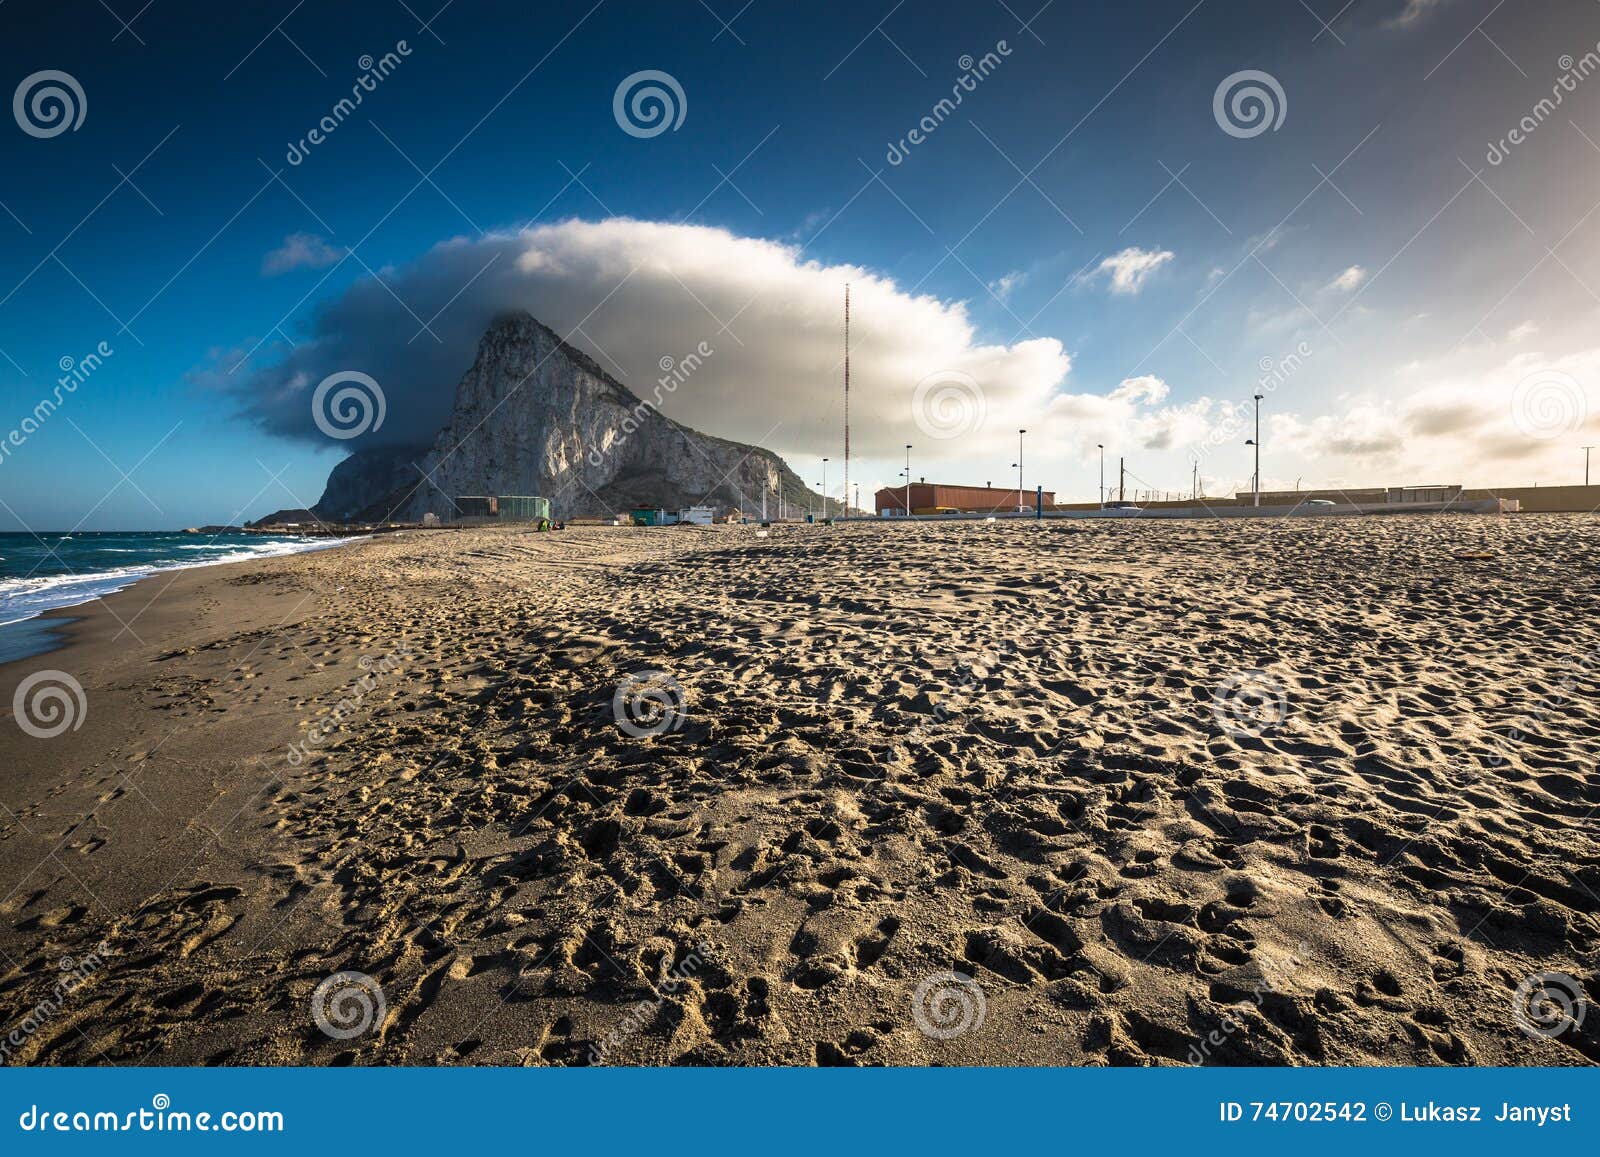 the rock of gibraltar from the beach of la linea, spain